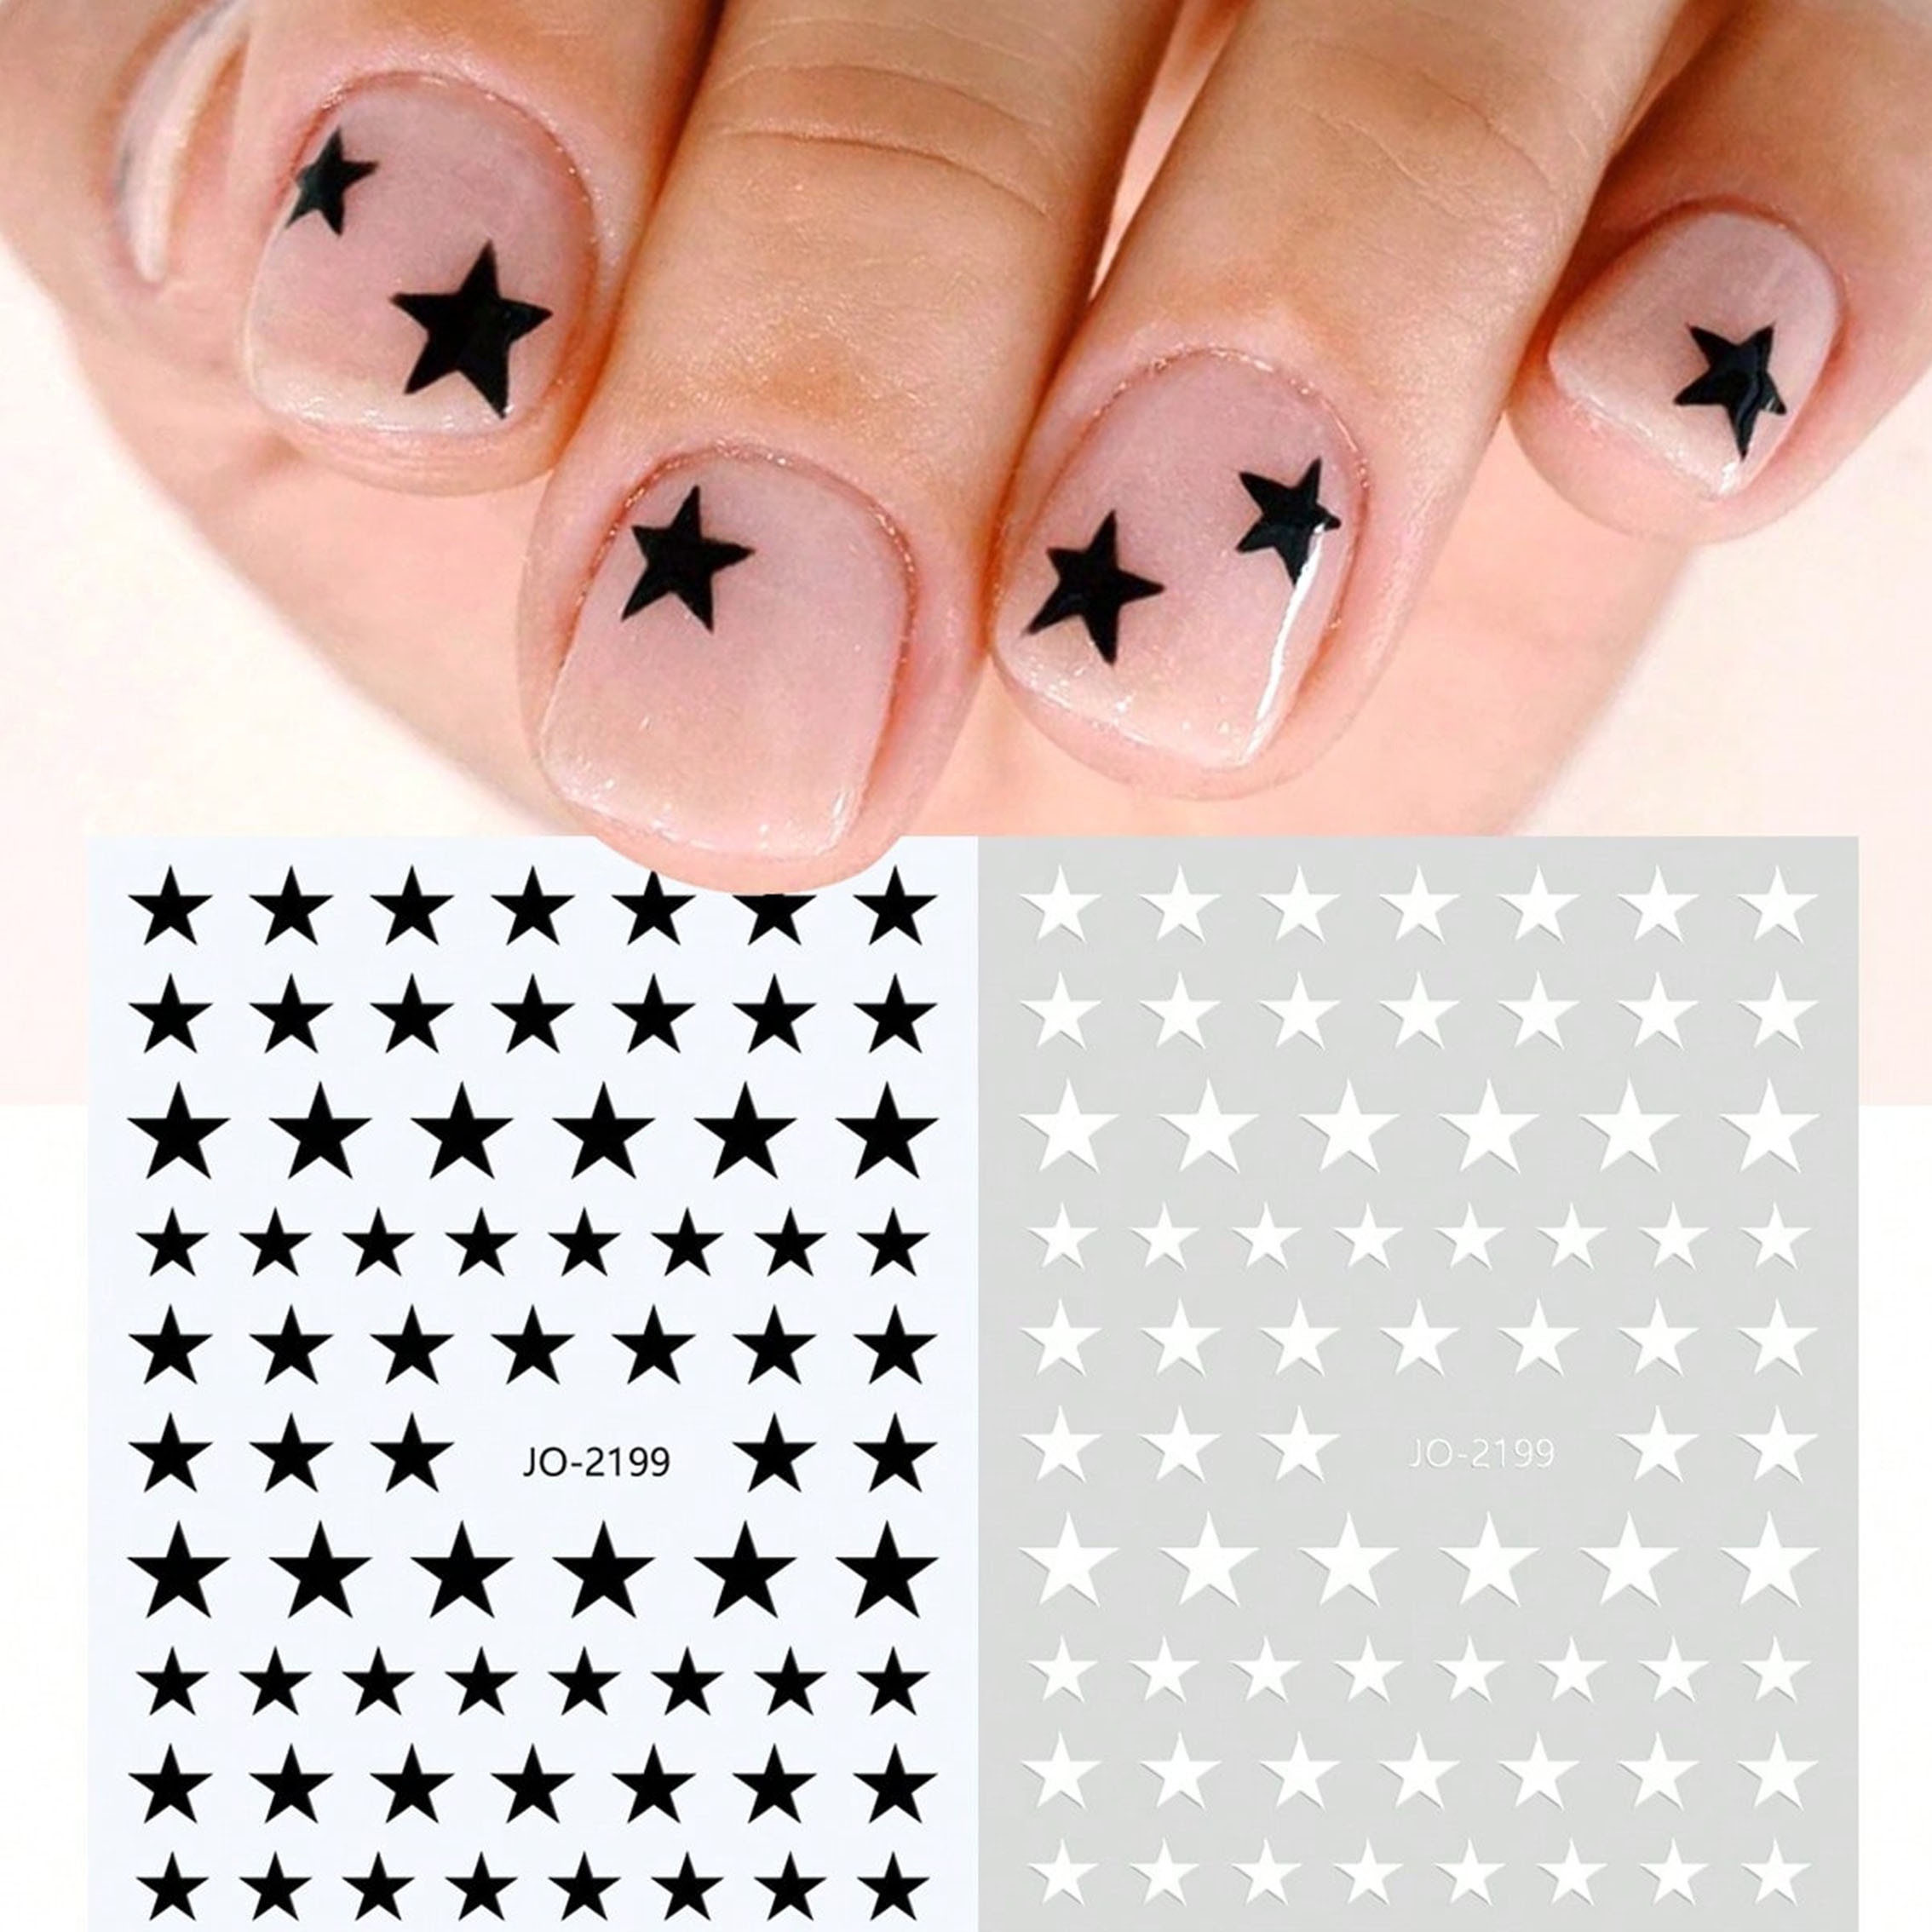 

2 Sheet Black White Star Design Nail Art Stickers, Self Adhesive Nail Art Decals For Nail Art Decoration,nail Art Supplies For Women And Girls